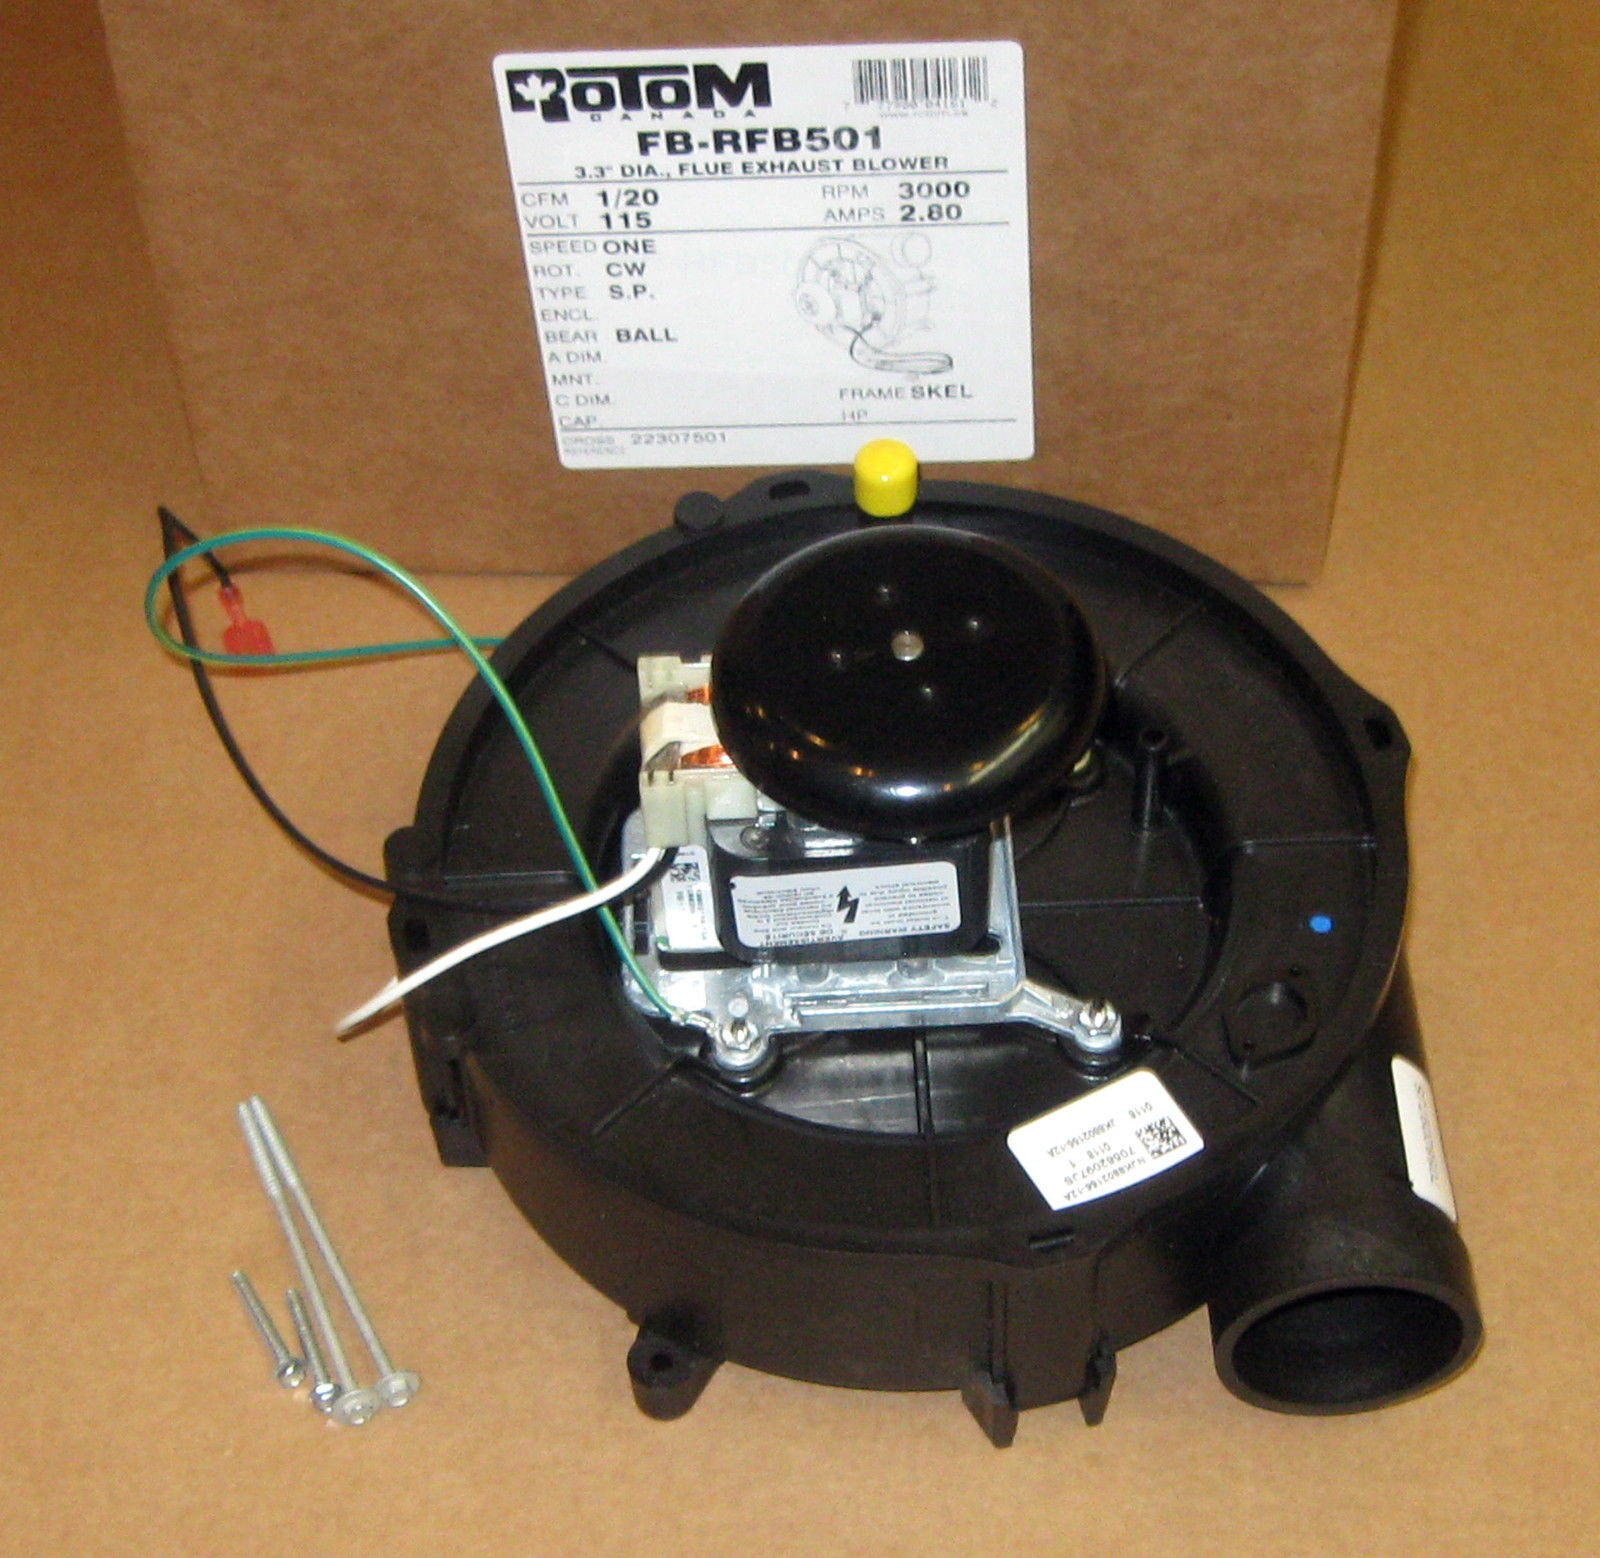 Details About Draft Inducer Furnace Blower Motor For Goodman 223075 01 119384 00 Rotom Rfb501 pertaining to proportions 1600 X 1558